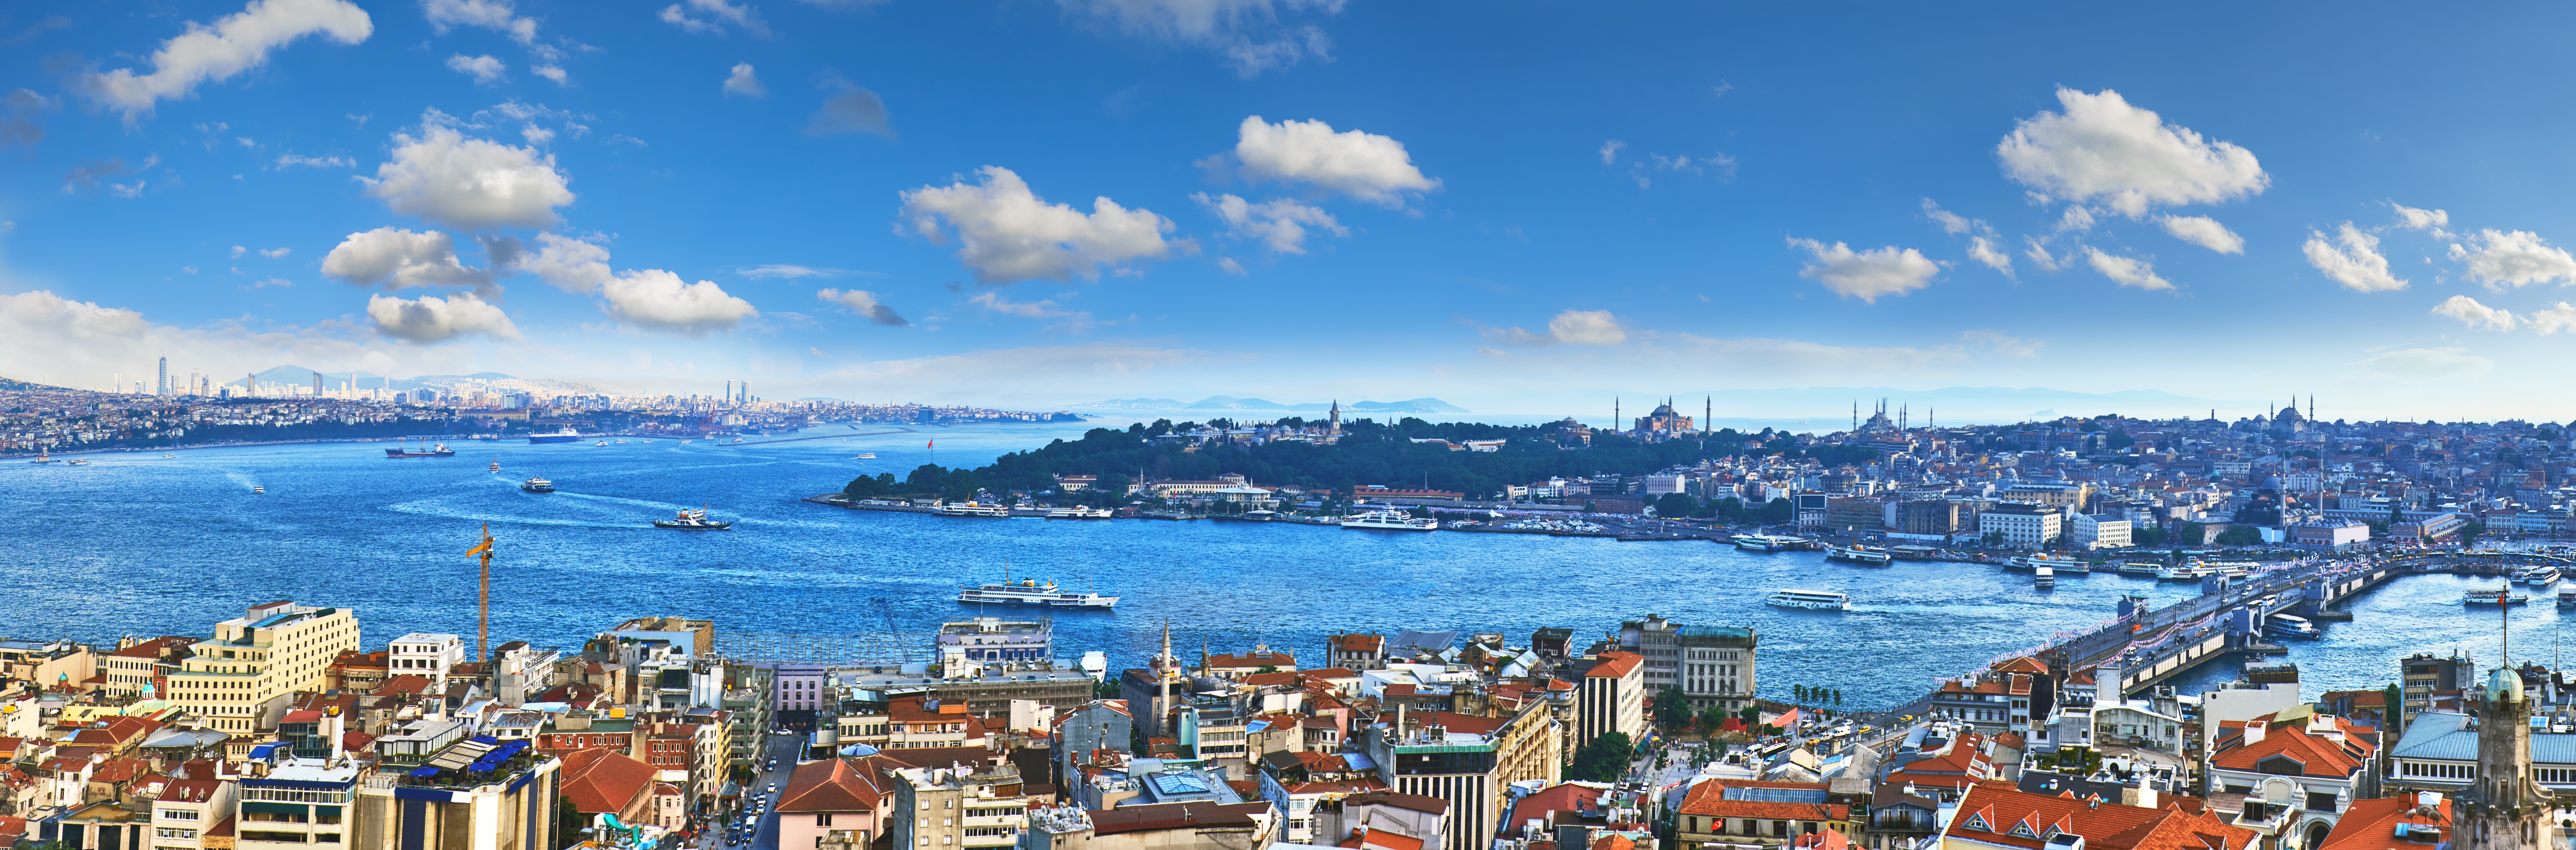 Cropped turkey  istanbul   golden horn from galata tower